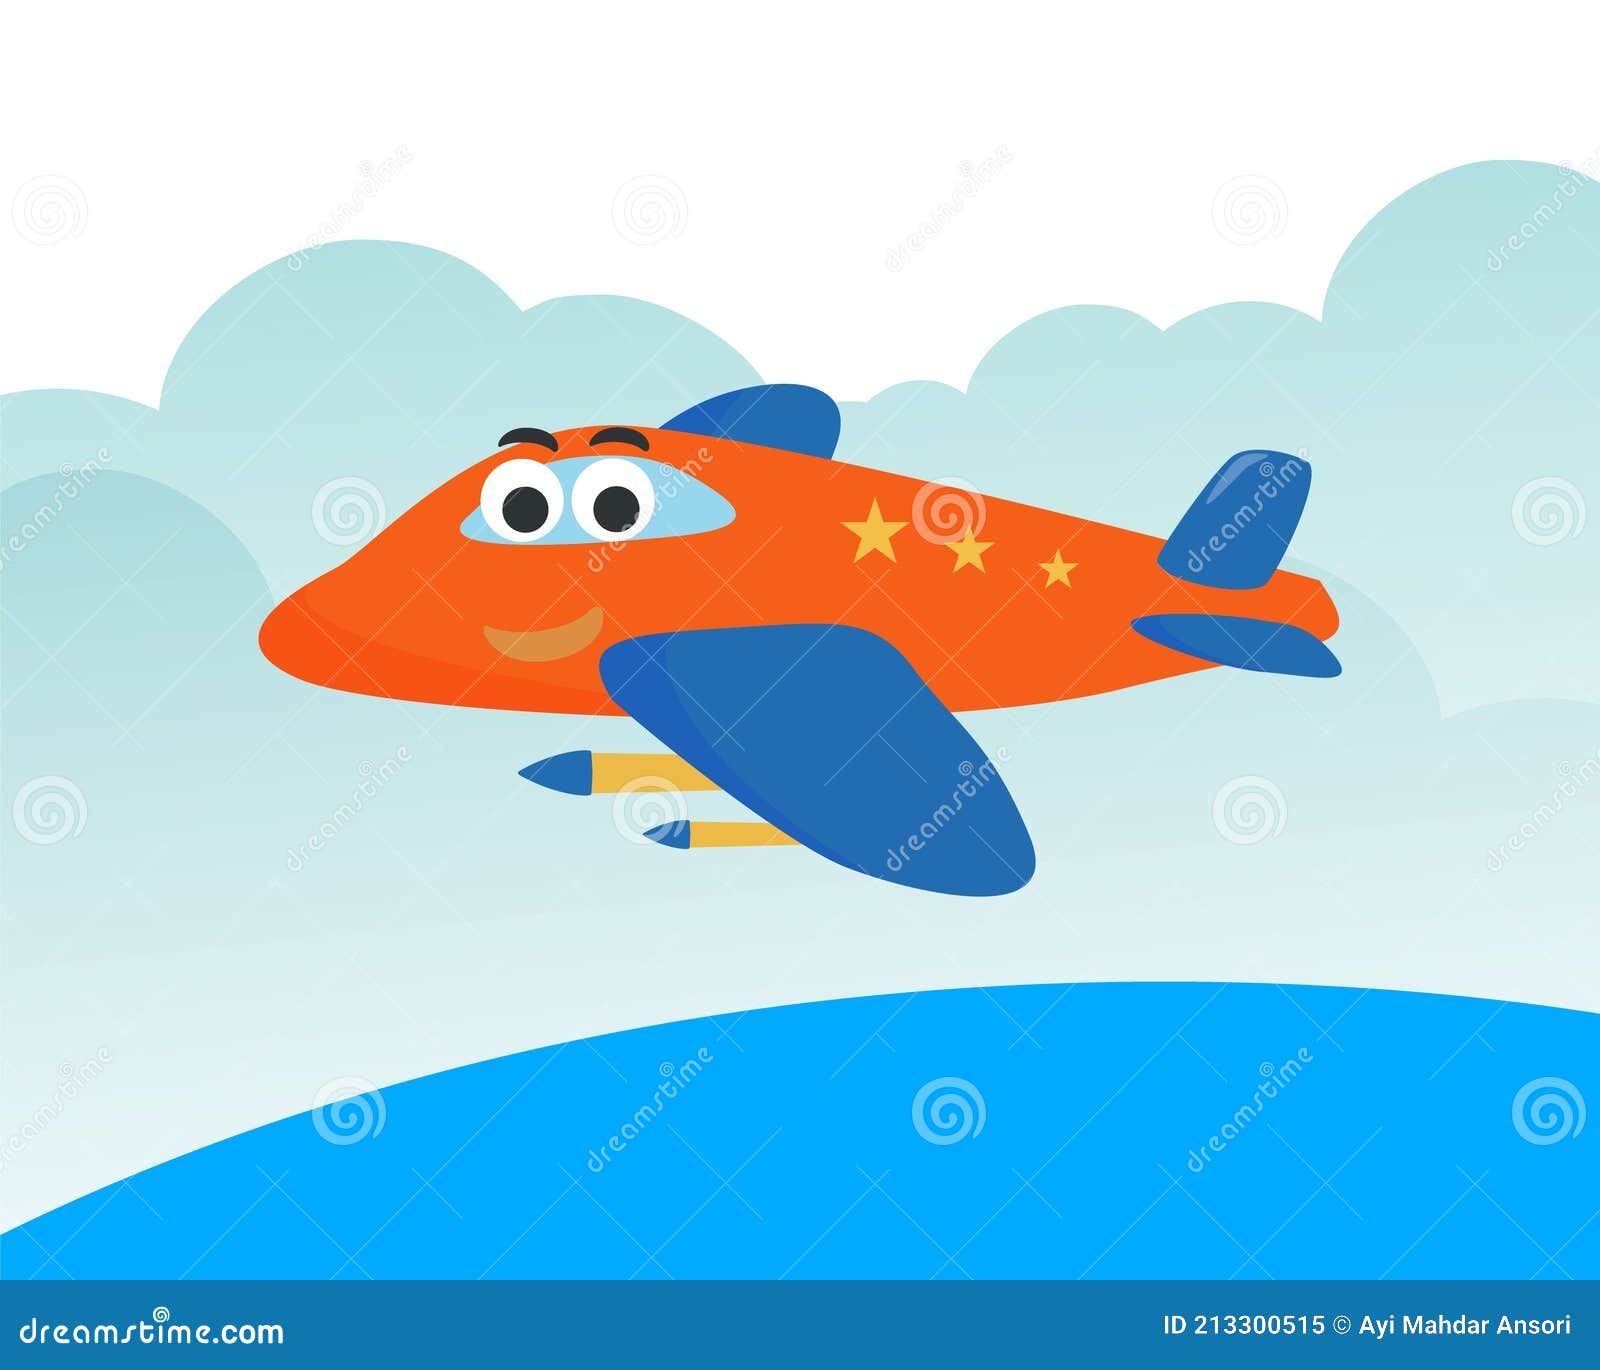 Funny Cute Airplane is Flying in the Air. Cartoon Hand Drawn Vector  Illustration Stock Vector - Illustration of cute, graphic: 213300515